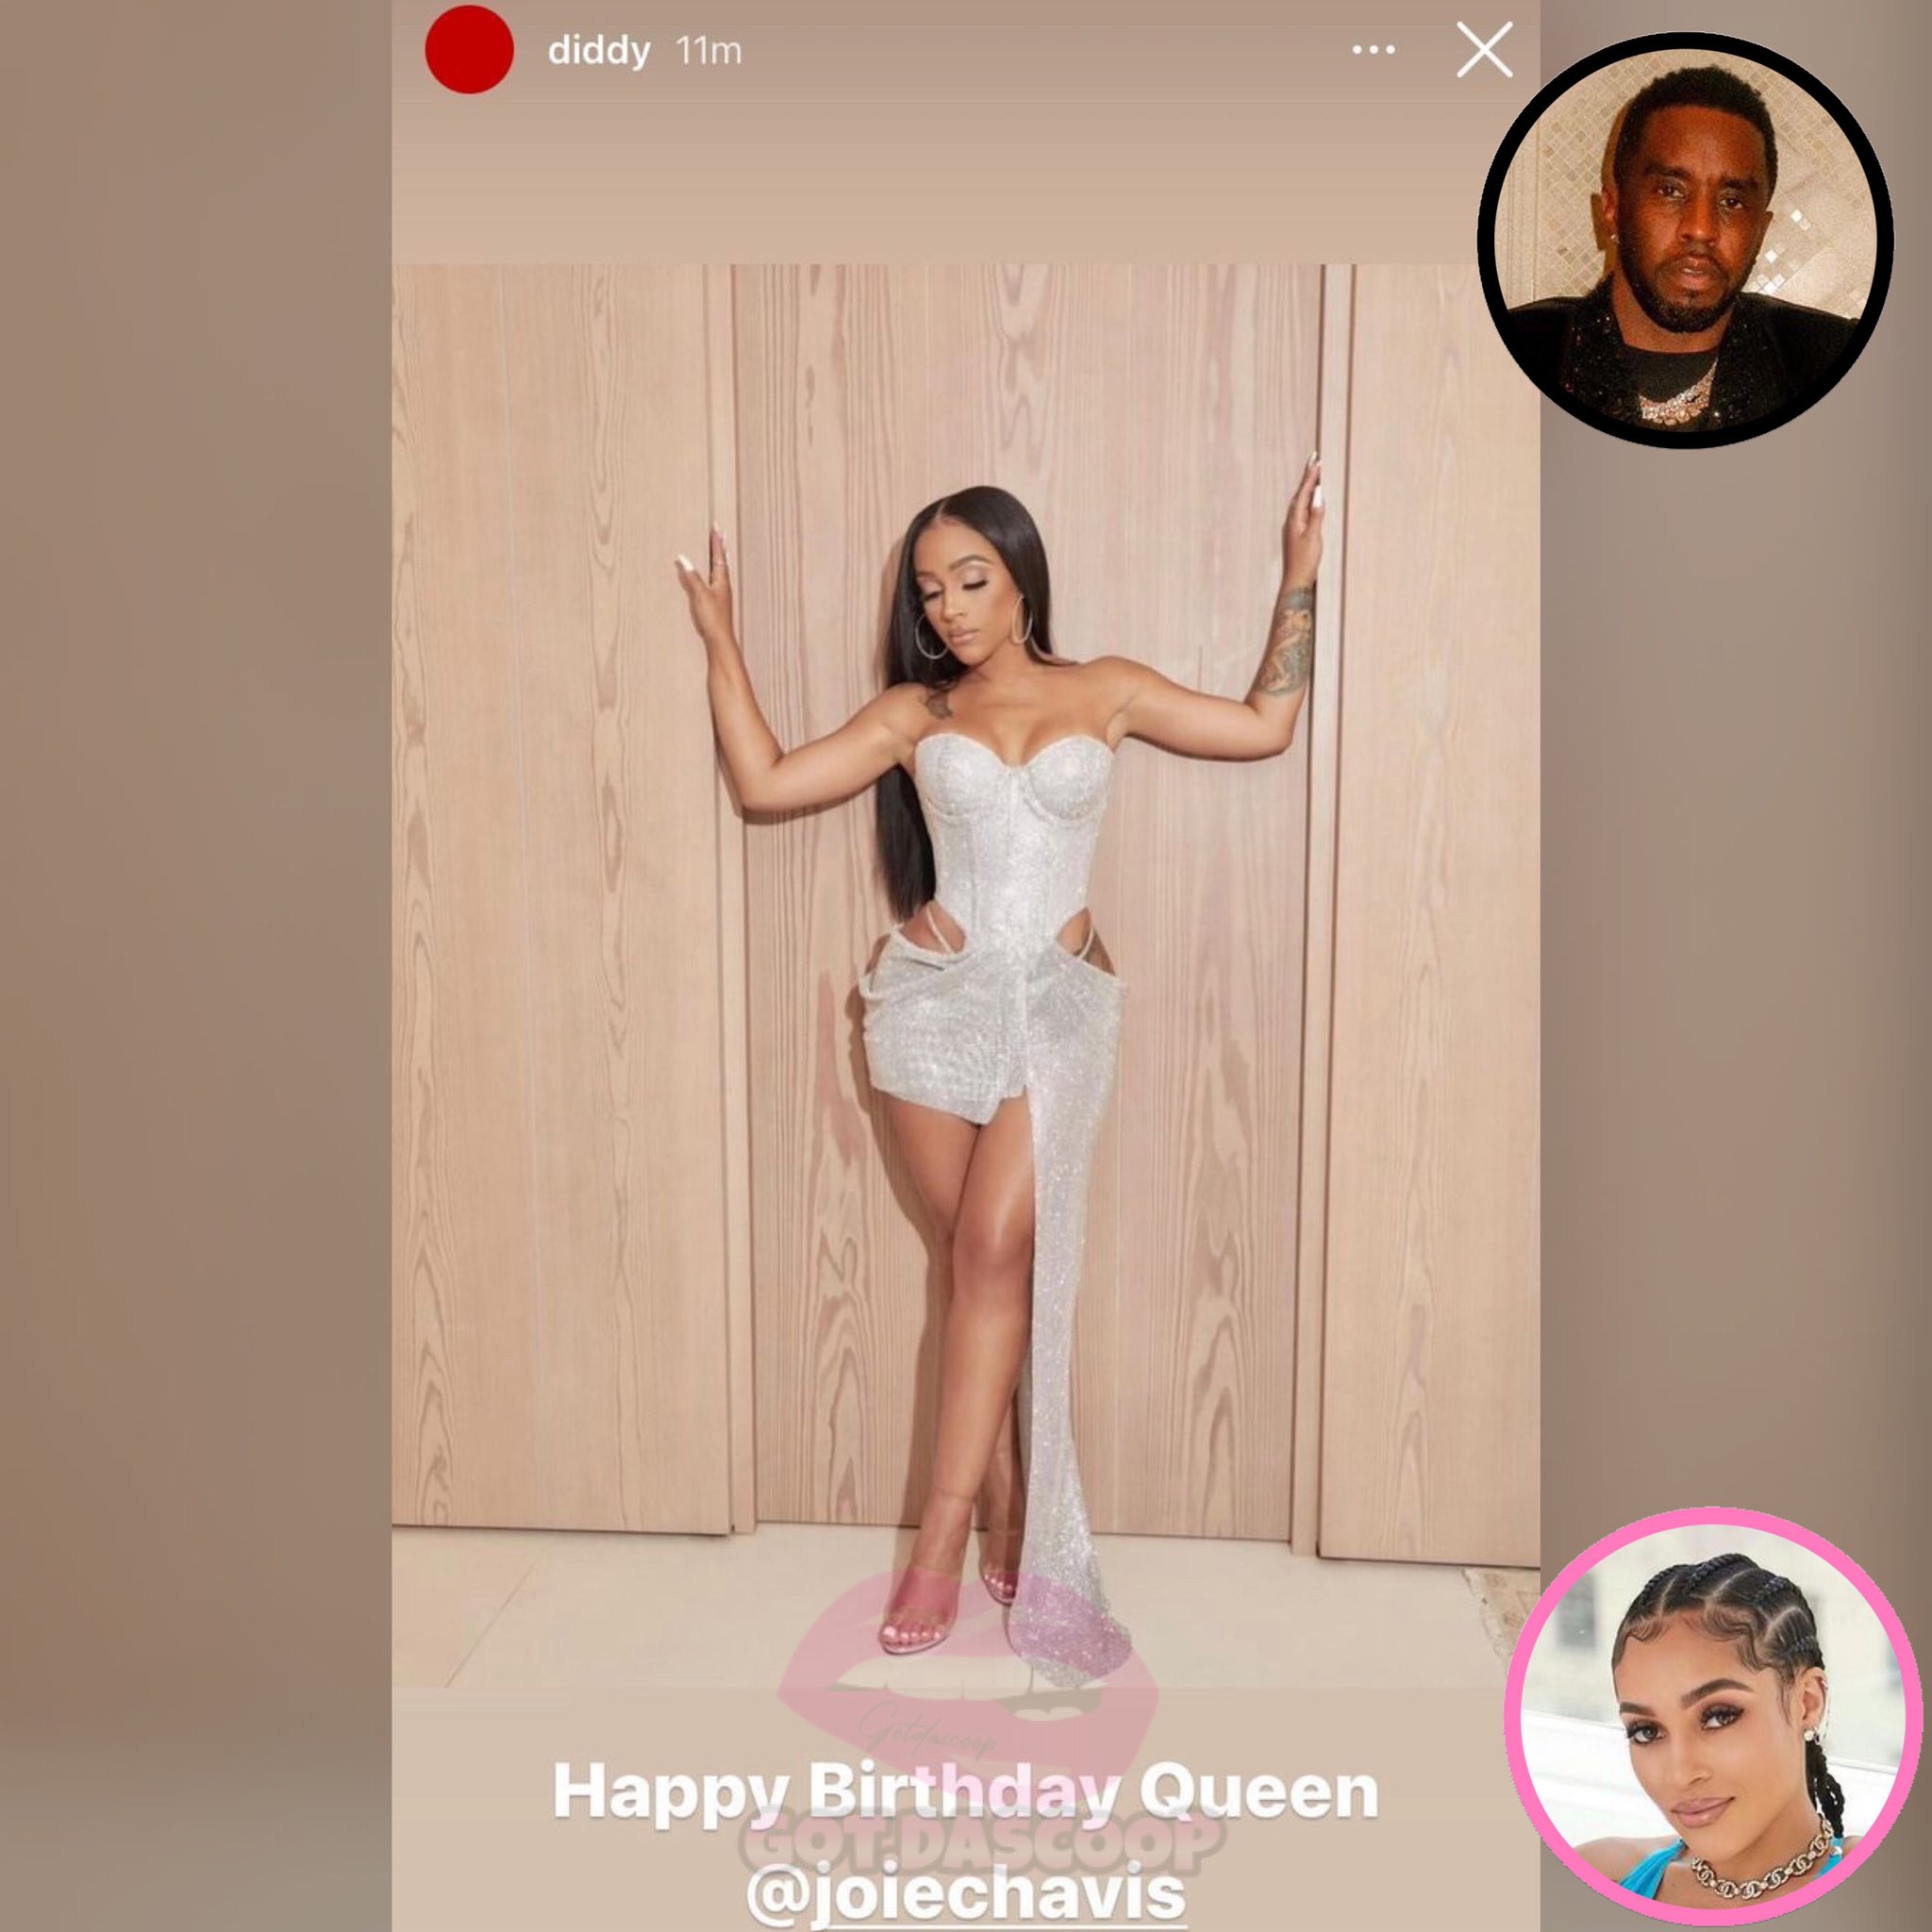 Diddy wishes his queen Joie Chavis a Happy Birthday   